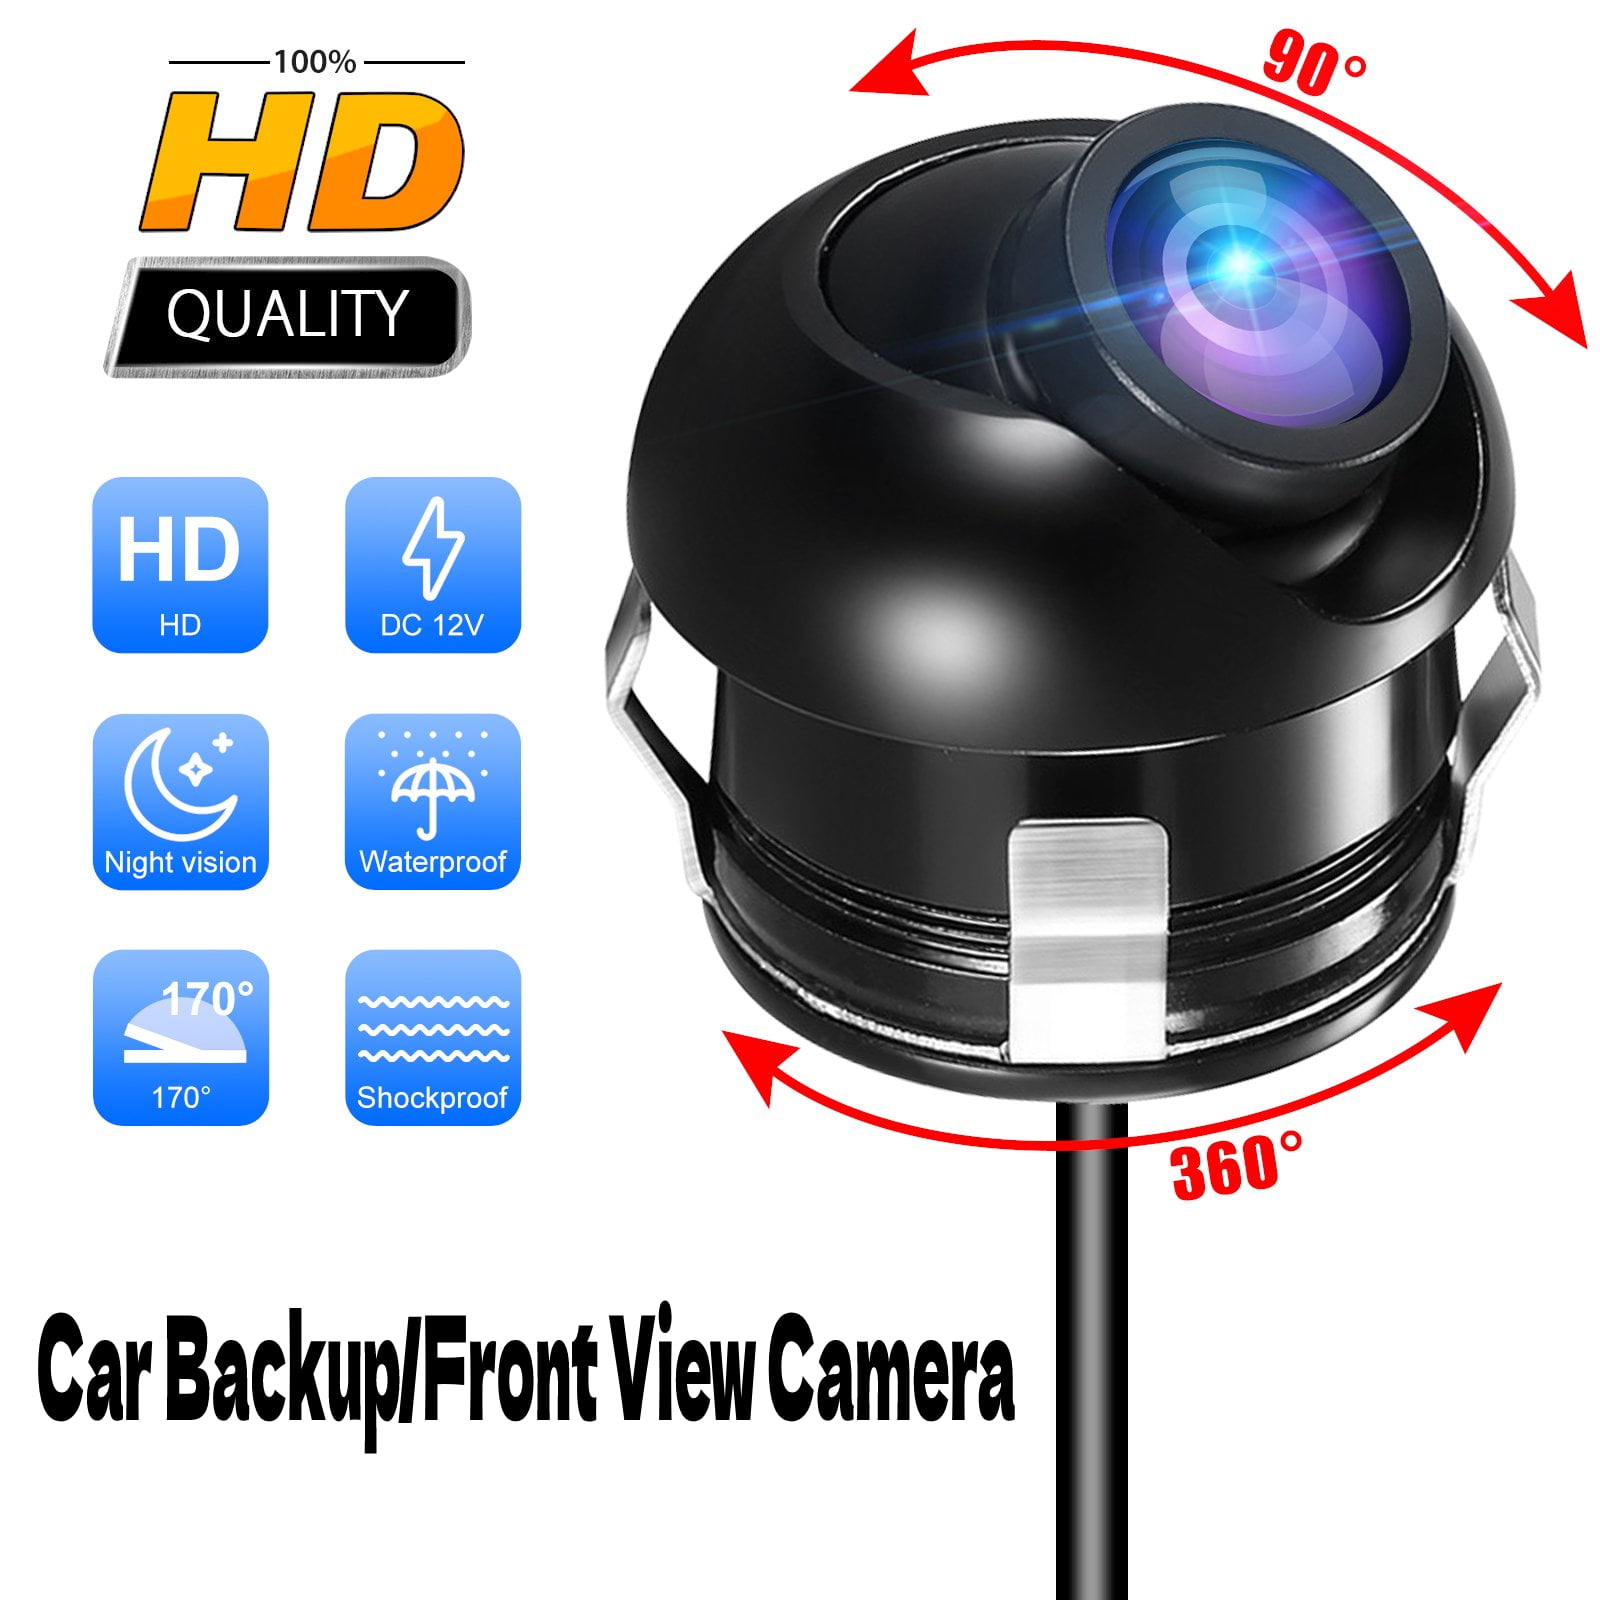 Wireless Backup Camera with 4.3 TFT Screen HD Rear View Camera Kit,IP 68 Waterproof,IR Night Vision,Front/Mirror View,Guild Lines One/Off for Cars,Trucks,Sedan,Minivans Driving/Backup Use 